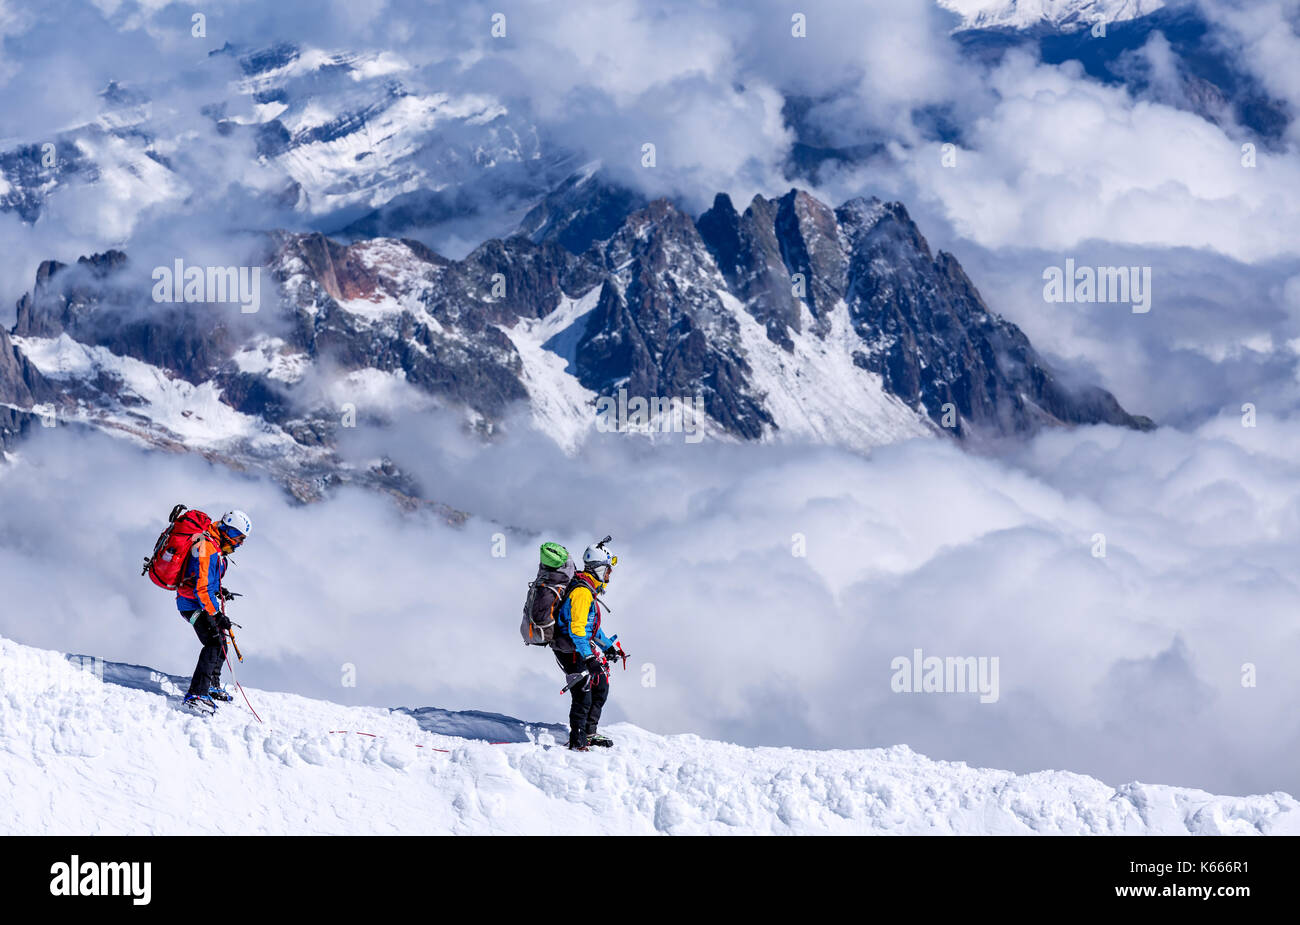 Two climbers on the slopes of Mont Blanc, Chamonix, France Stock Photo